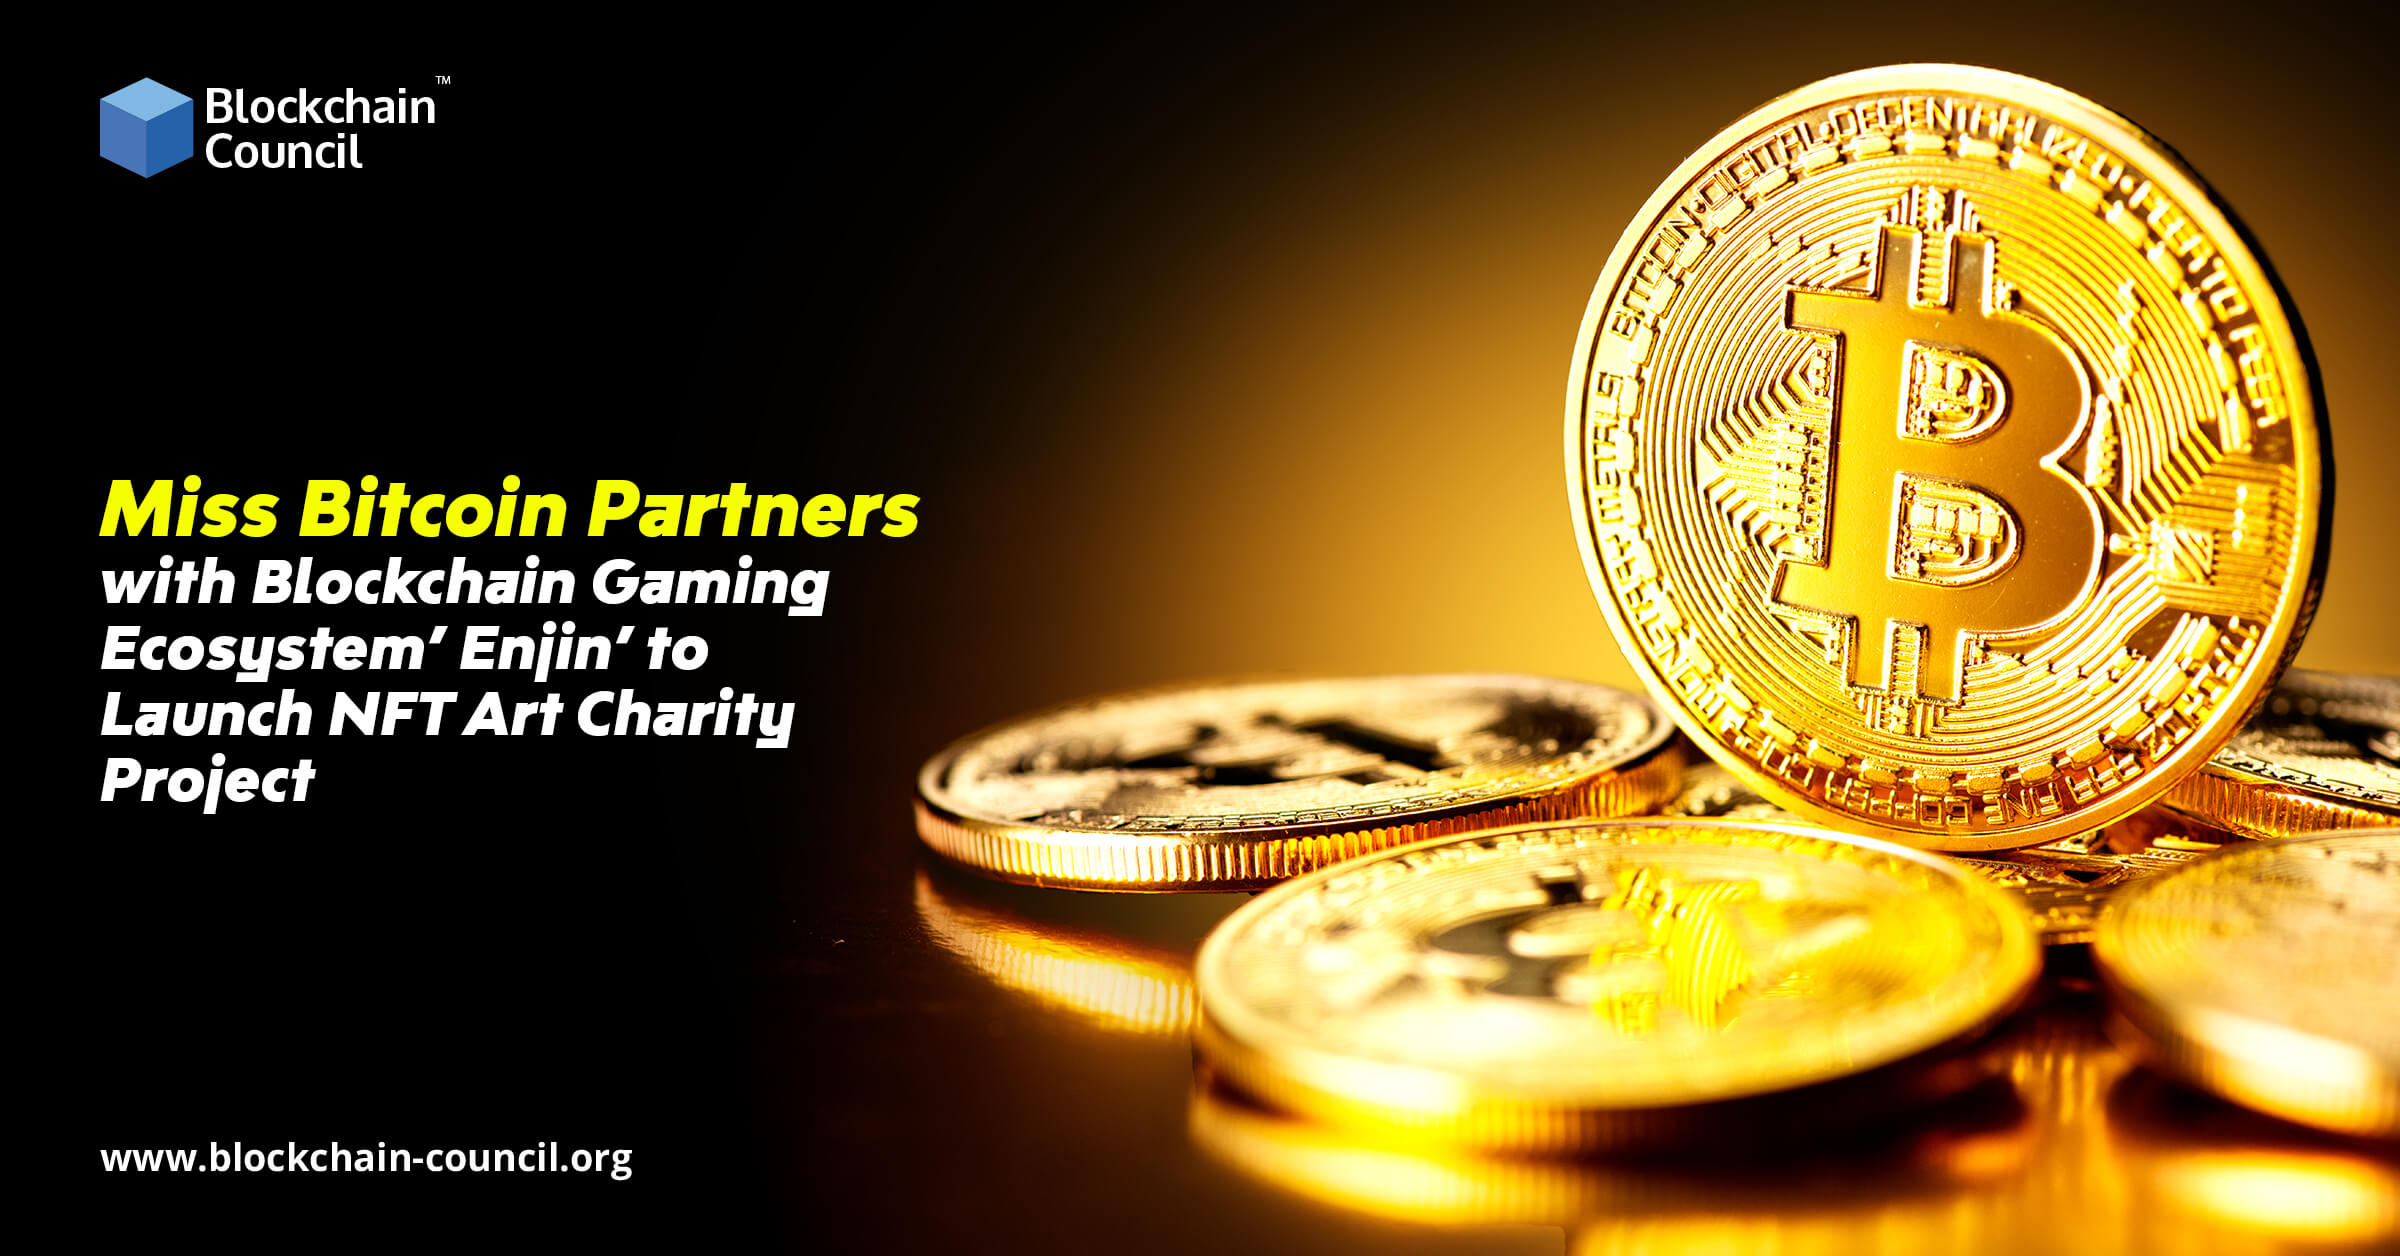 Miss Bitcoin Partners with Blockchain Gaming Ecosystem’ Enjin’ to Launch NFT Art Charity Project